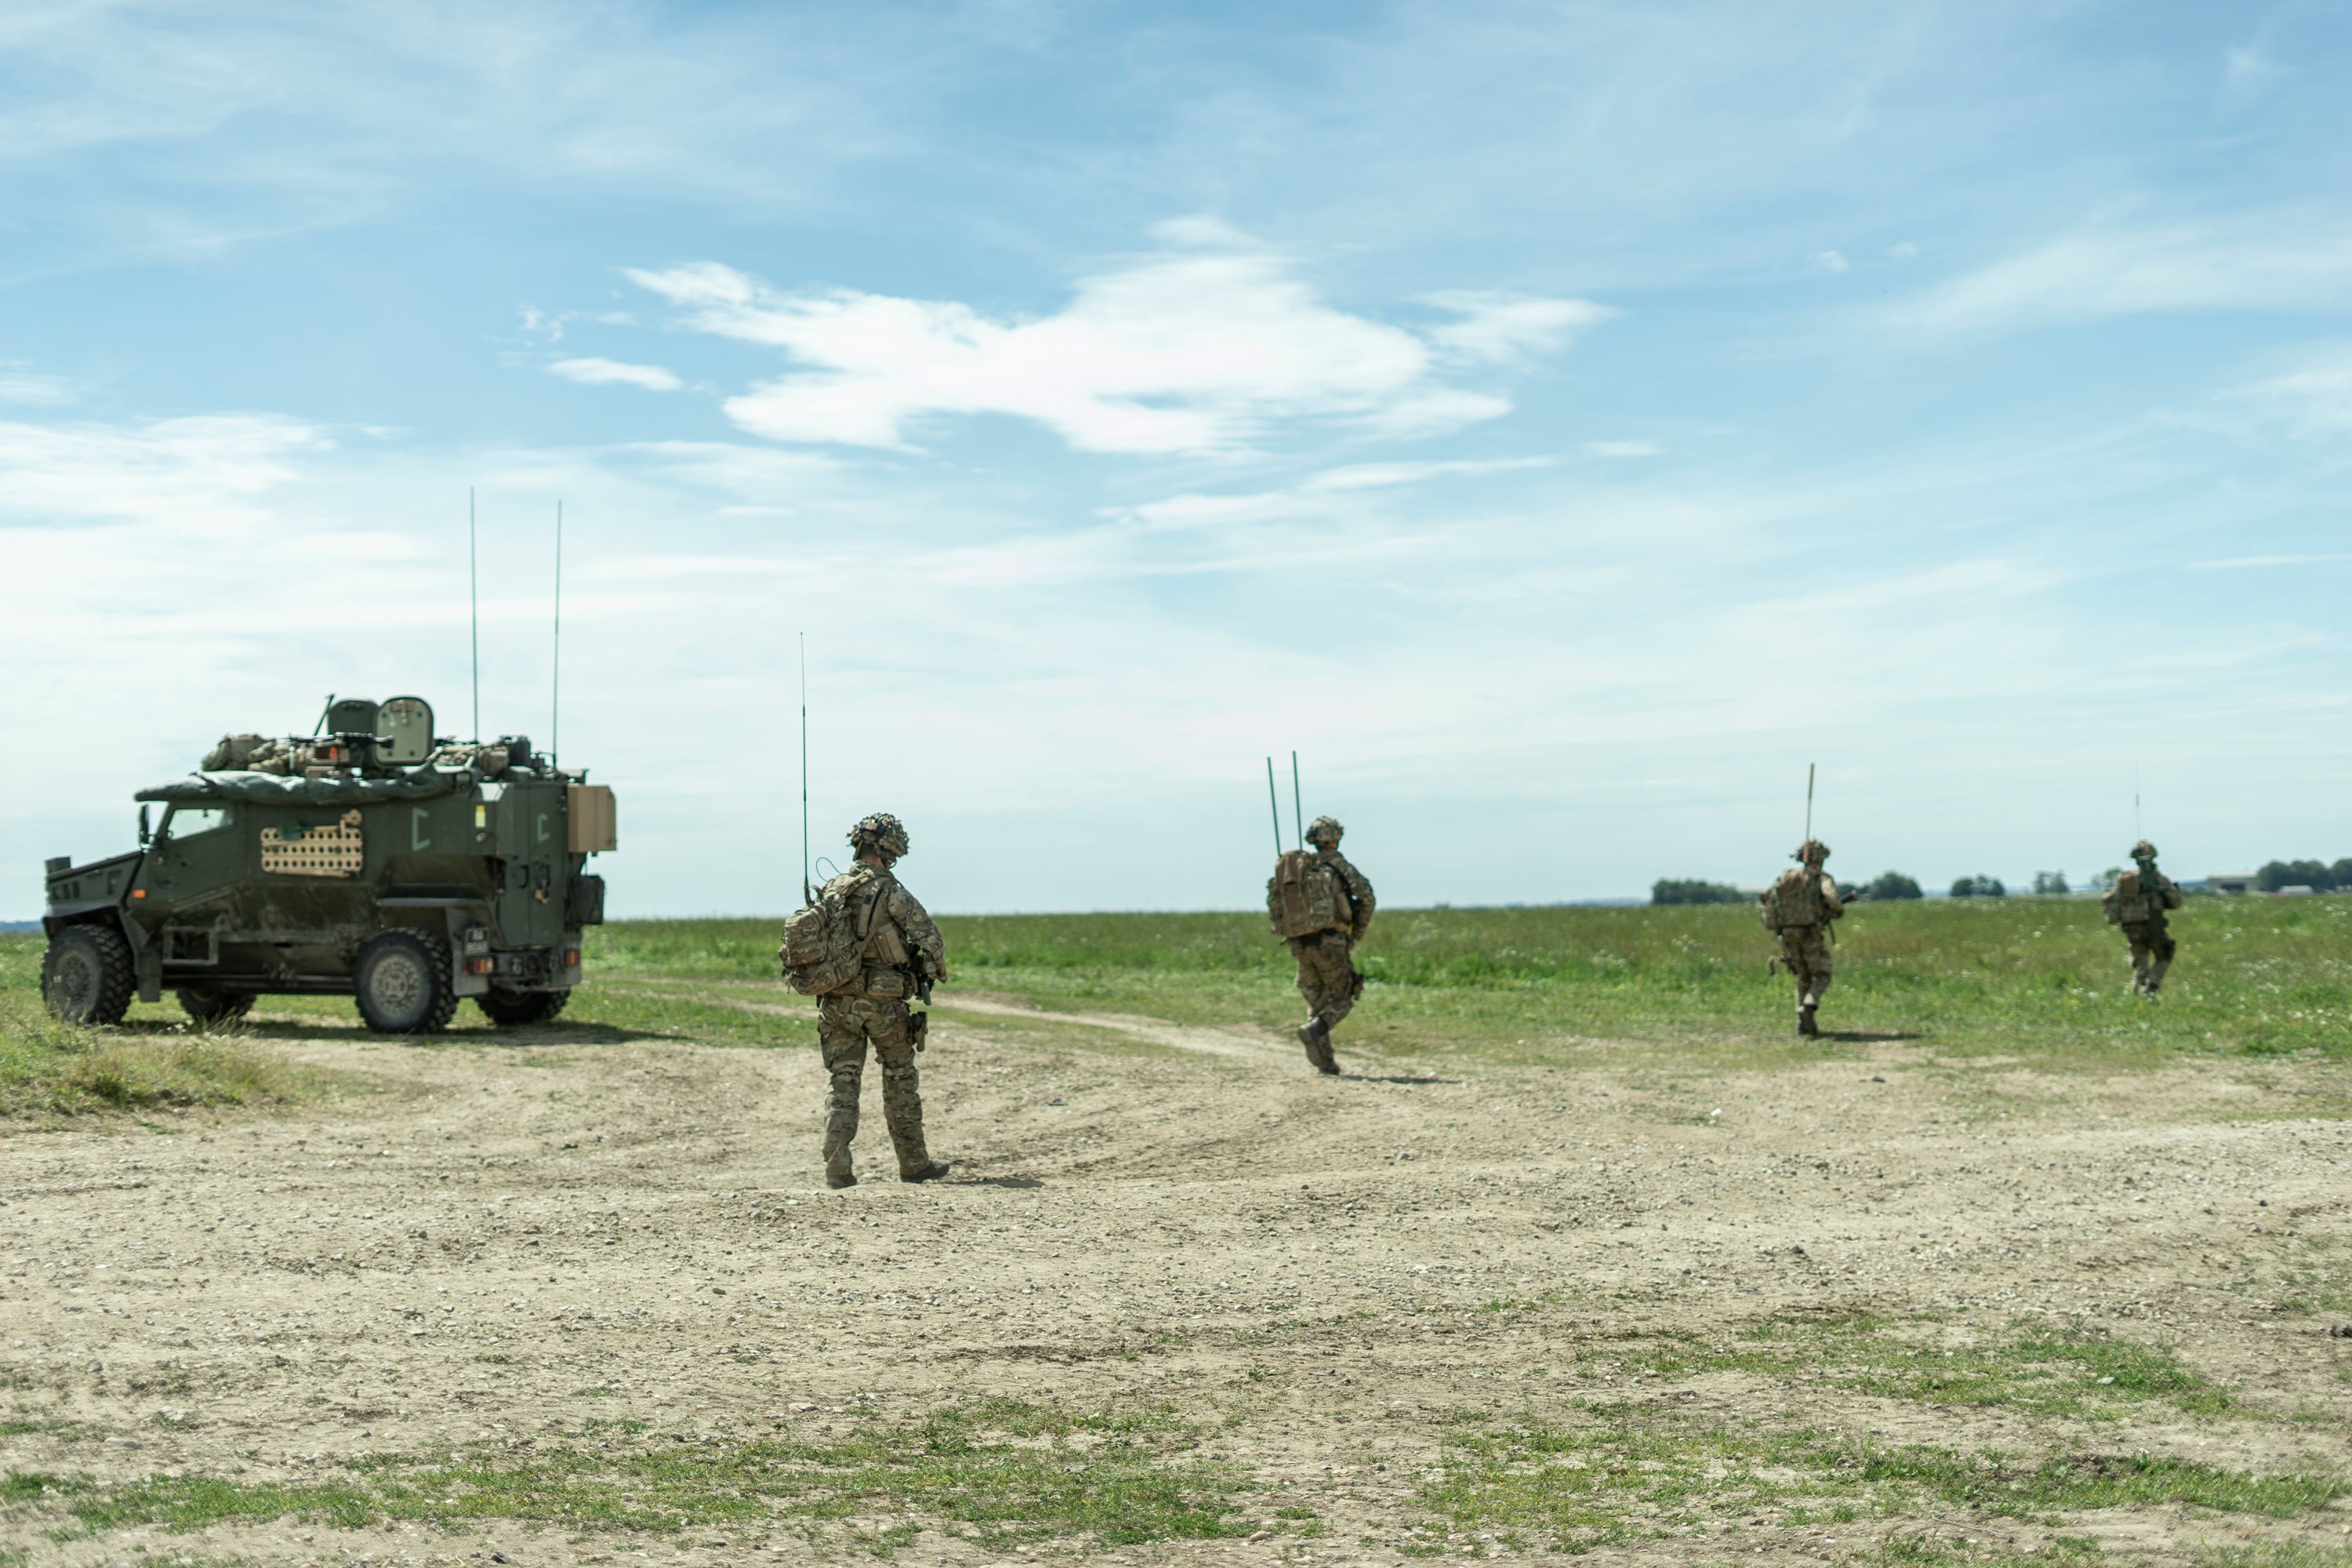 The first integration exercise between Royal Dragoons and Little Anglians